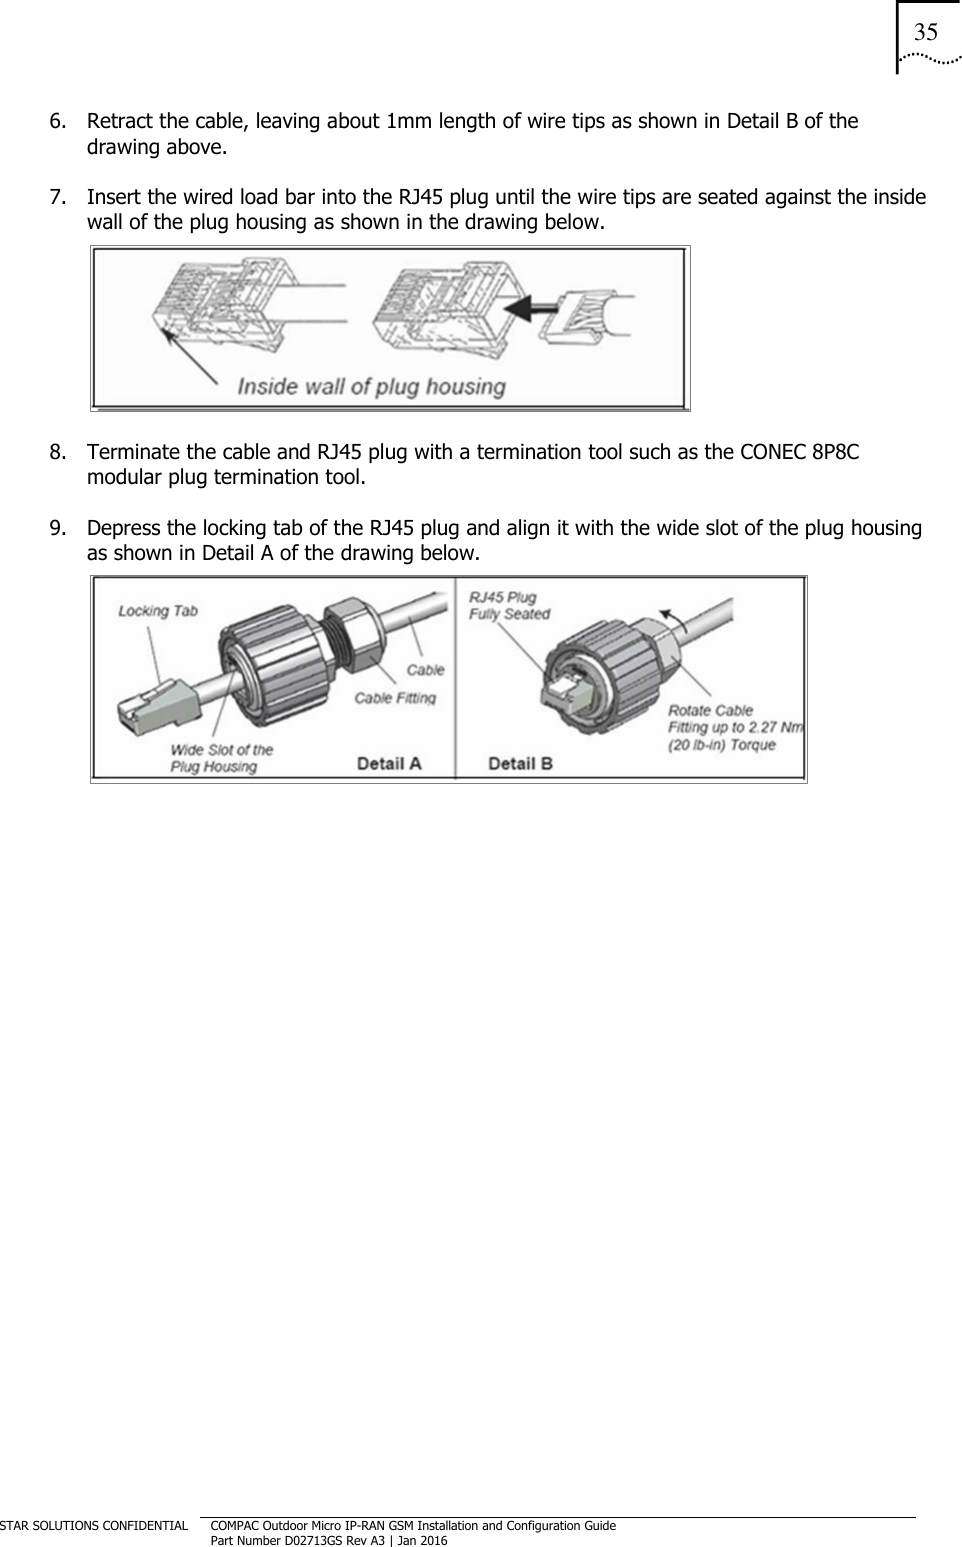 35  STAR SOLUTIONS CONFIDENTIAL COMPAC Outdoor Micro IP-RAN GSM Installation and Configuration Guide Part Number D02713GS Rev A3 | Jan 2016  6. Retract the cable, leaving about 1mm length of wire tips as shown in Detail B of the drawing above. 7. Insert the wired load bar into the RJ45 plug until the wire tips are seated against the inside wall of the plug housing as shown in the drawing below.  8. Terminate the cable and RJ45 plug with a termination tool such as the CONEC 8P8C modular plug termination tool. 9. Depress the locking tab of the RJ45 plug and align it with the wide slot of the plug housing as shown in Detail A of the drawing below.    